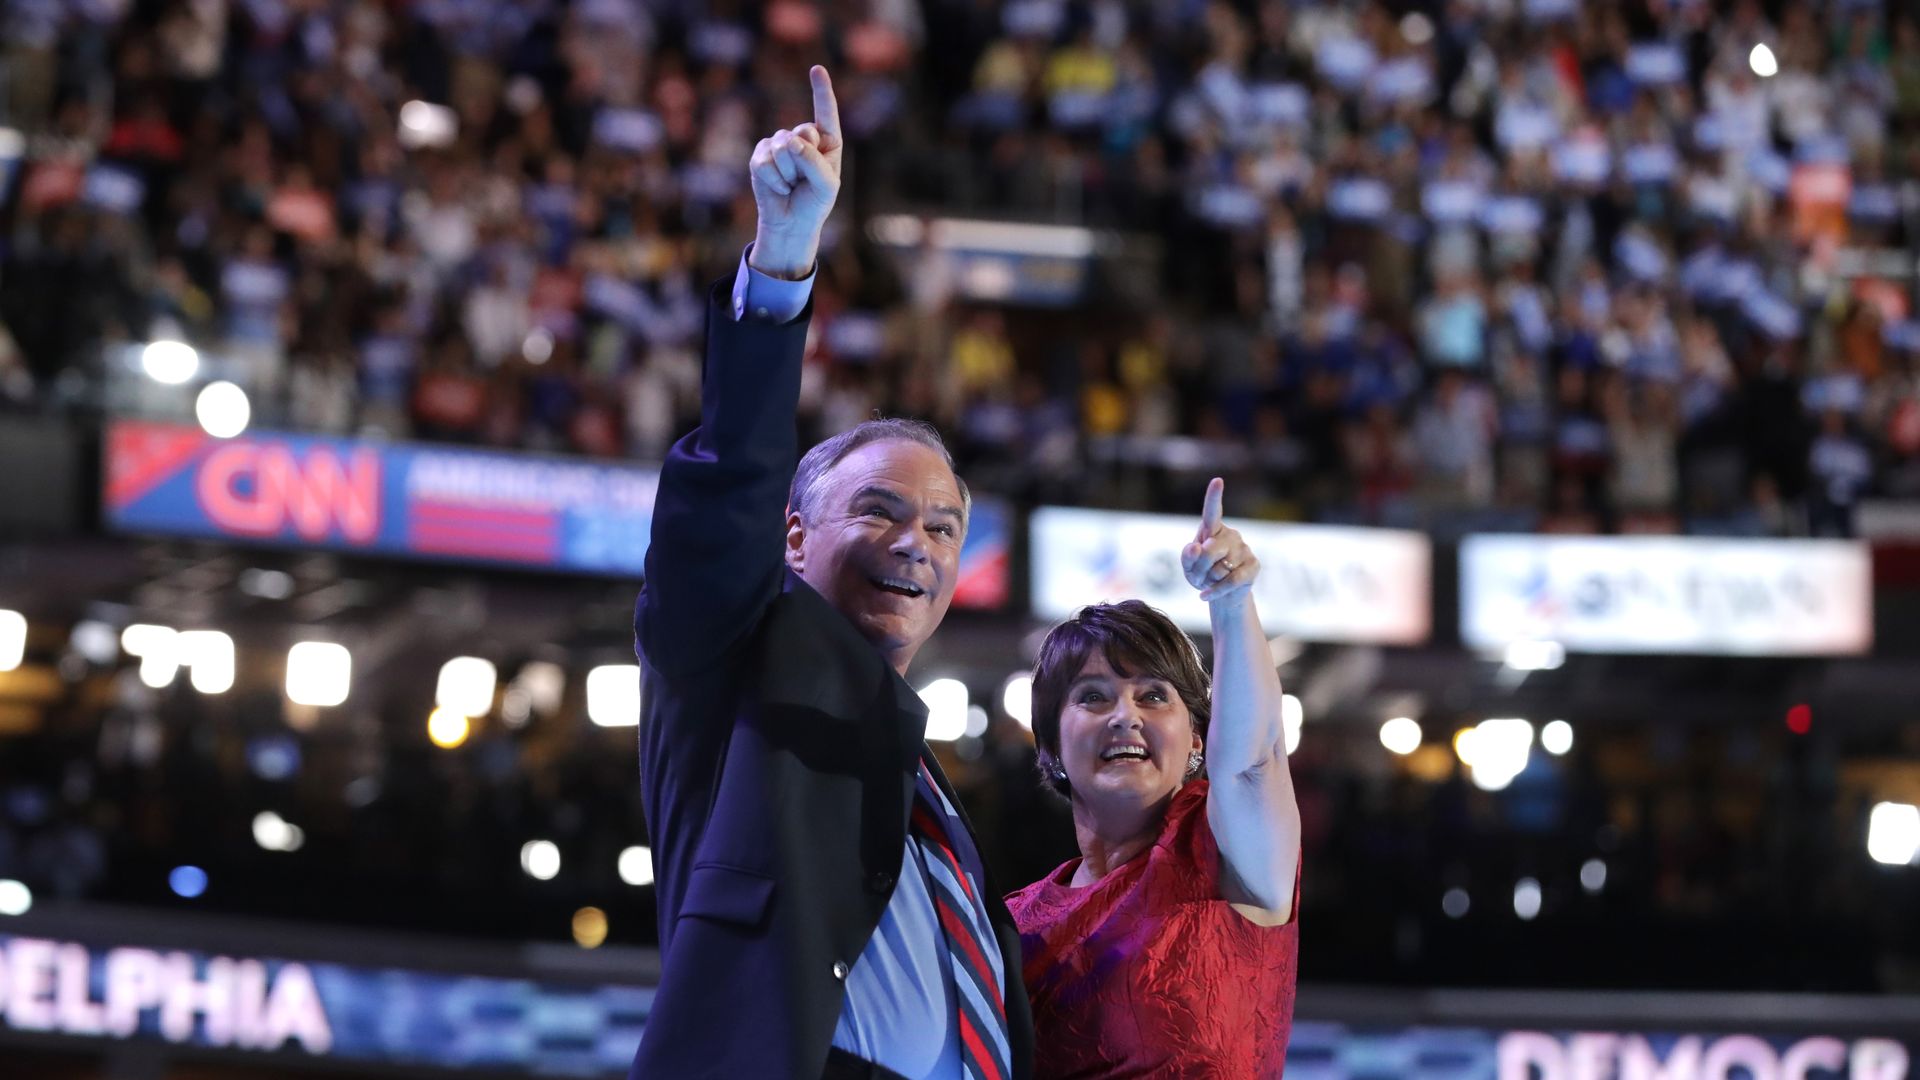 Sen. Tim Kaine and Anne Holton point upward while on stage at the 2016 Democratic National Convention.